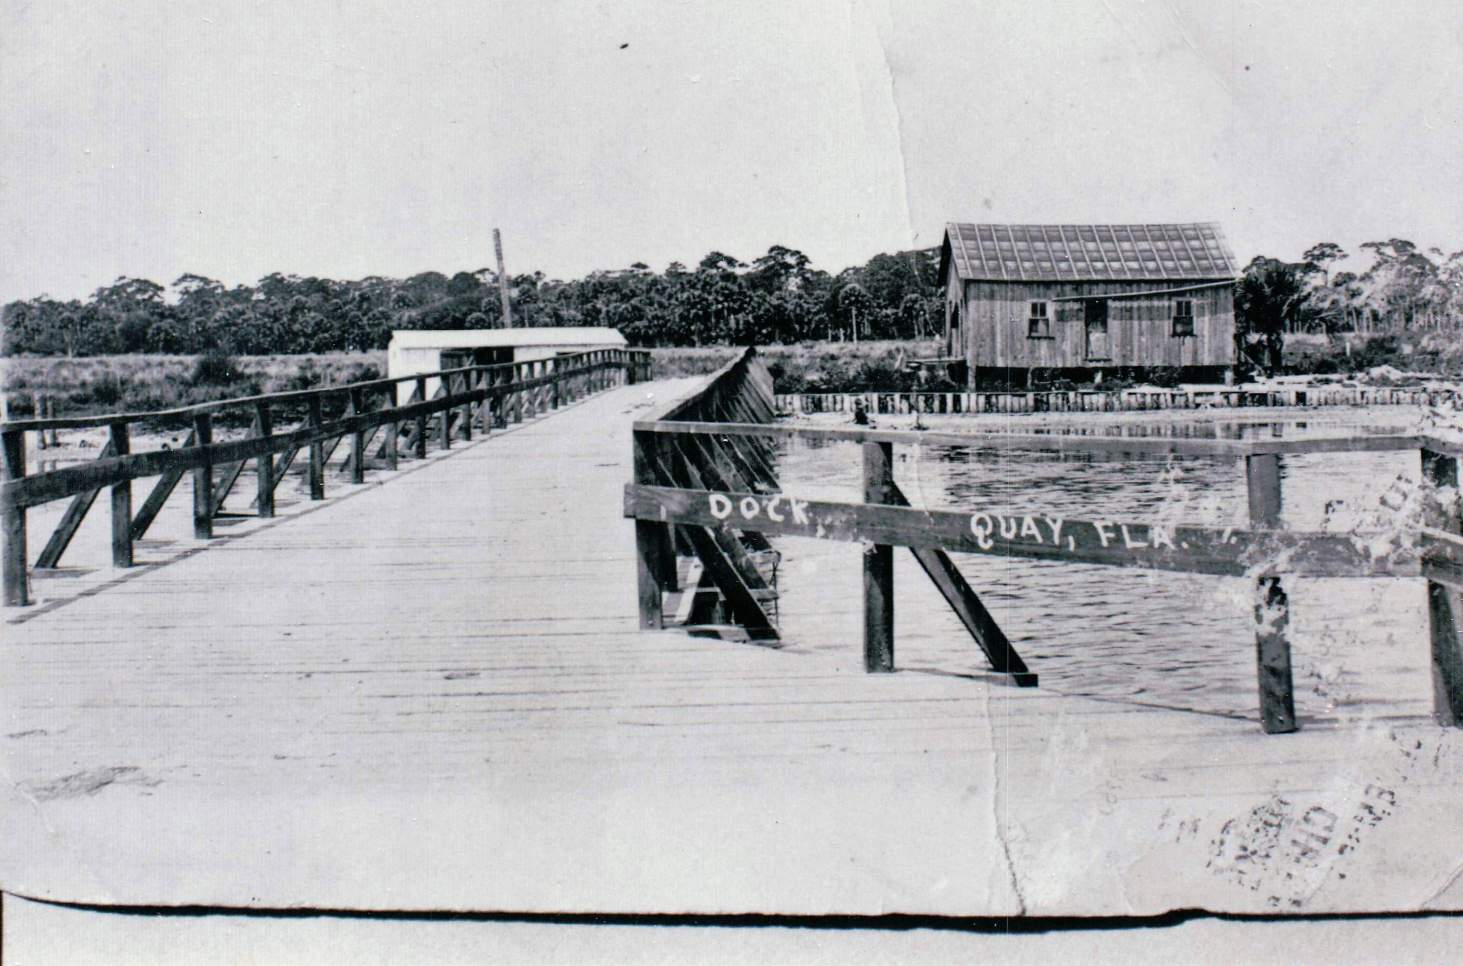 Old photo of a boardwalk with a building in the distance